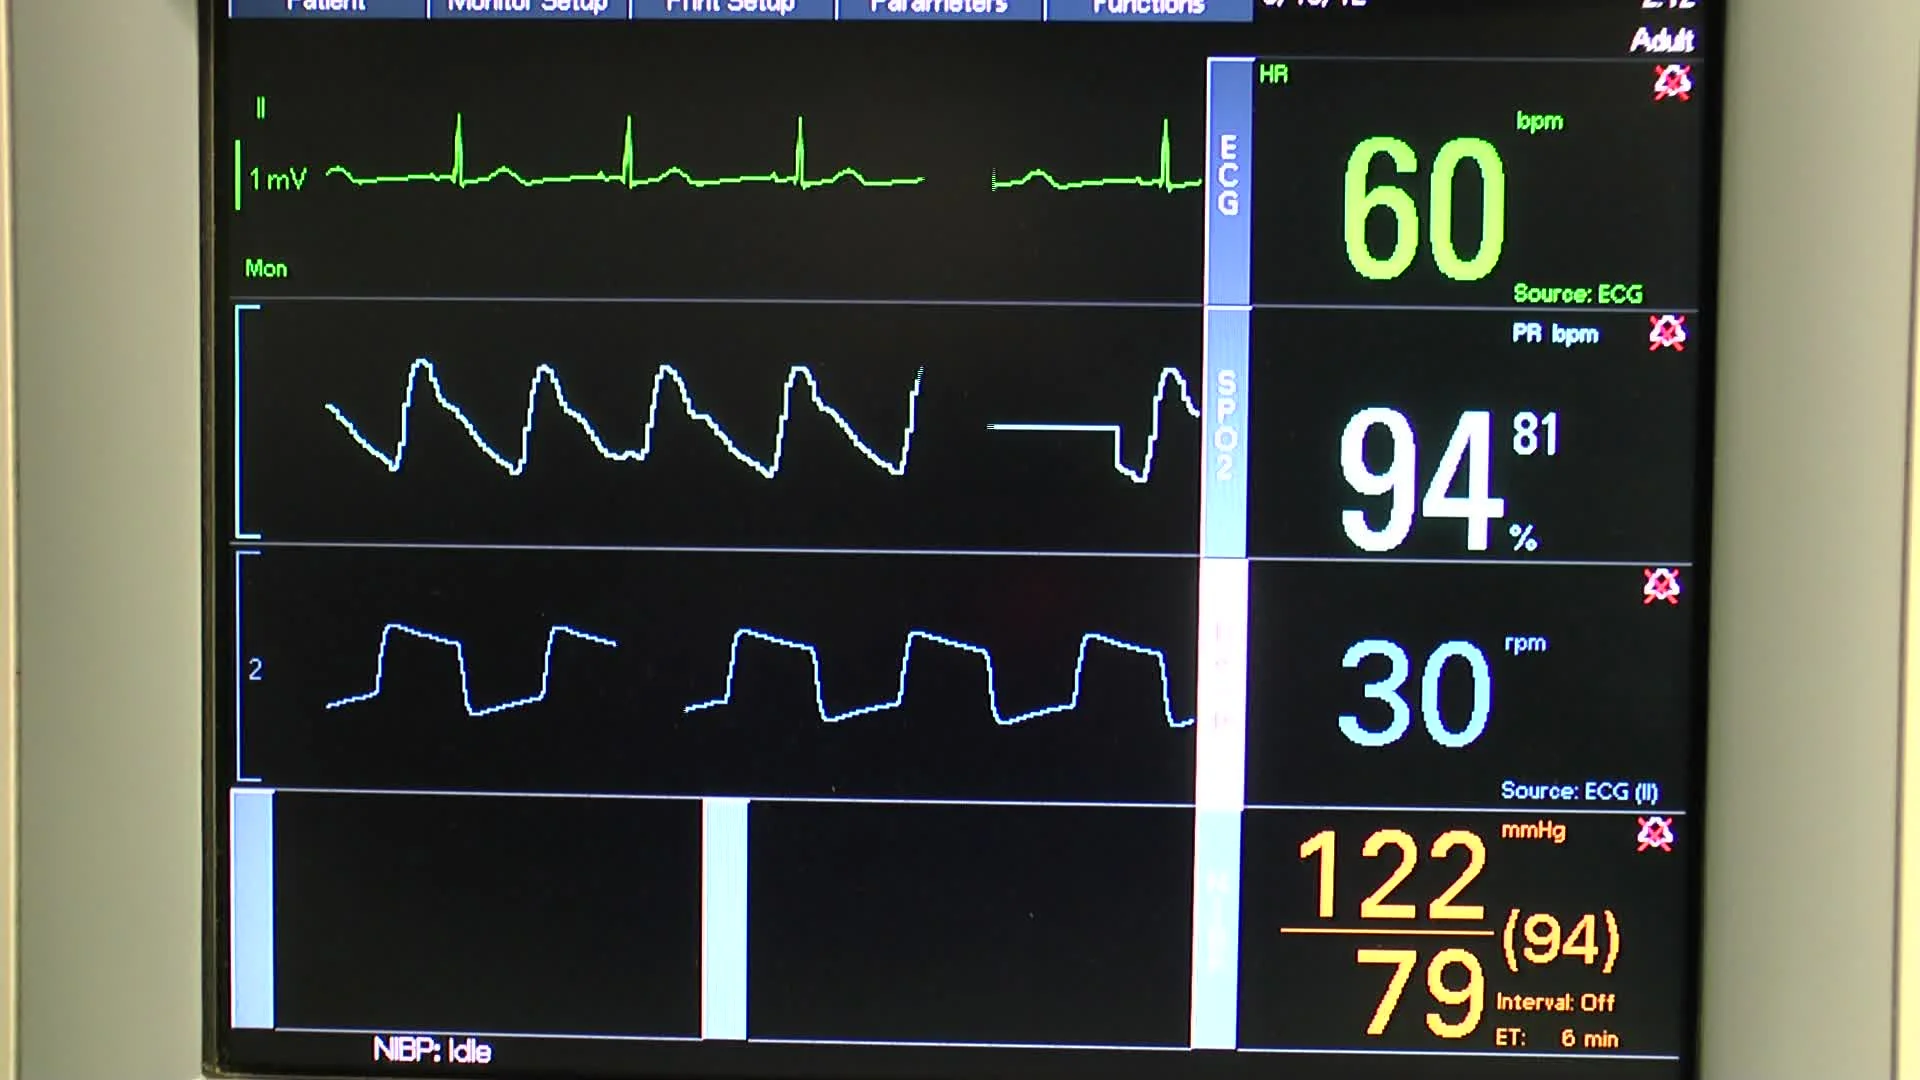 How to Read a Hospital Monitor: Understanding Vital Signs